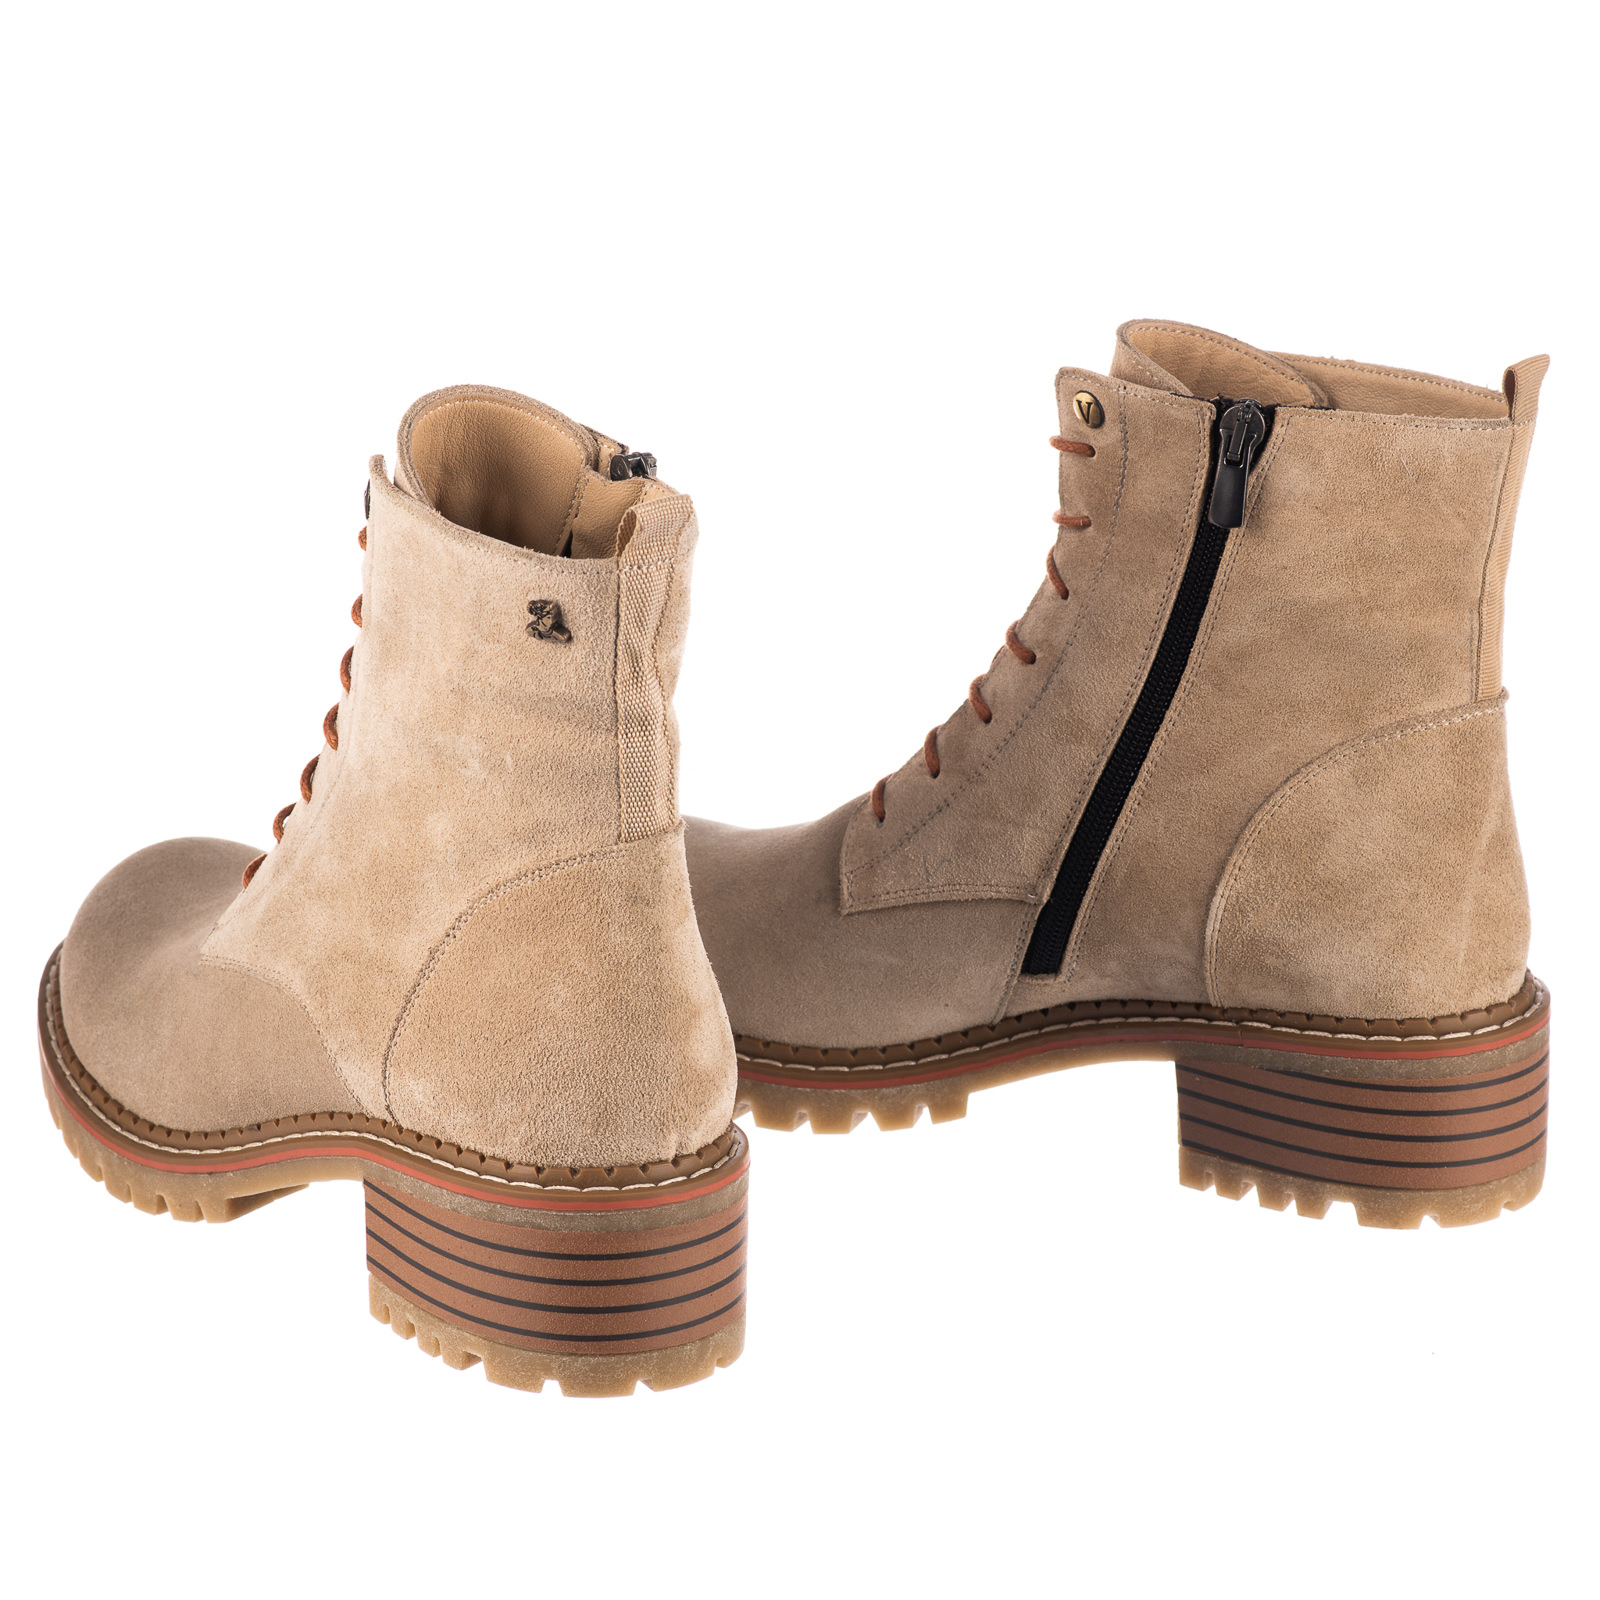 Leather ankle boots B435 - BEIGE